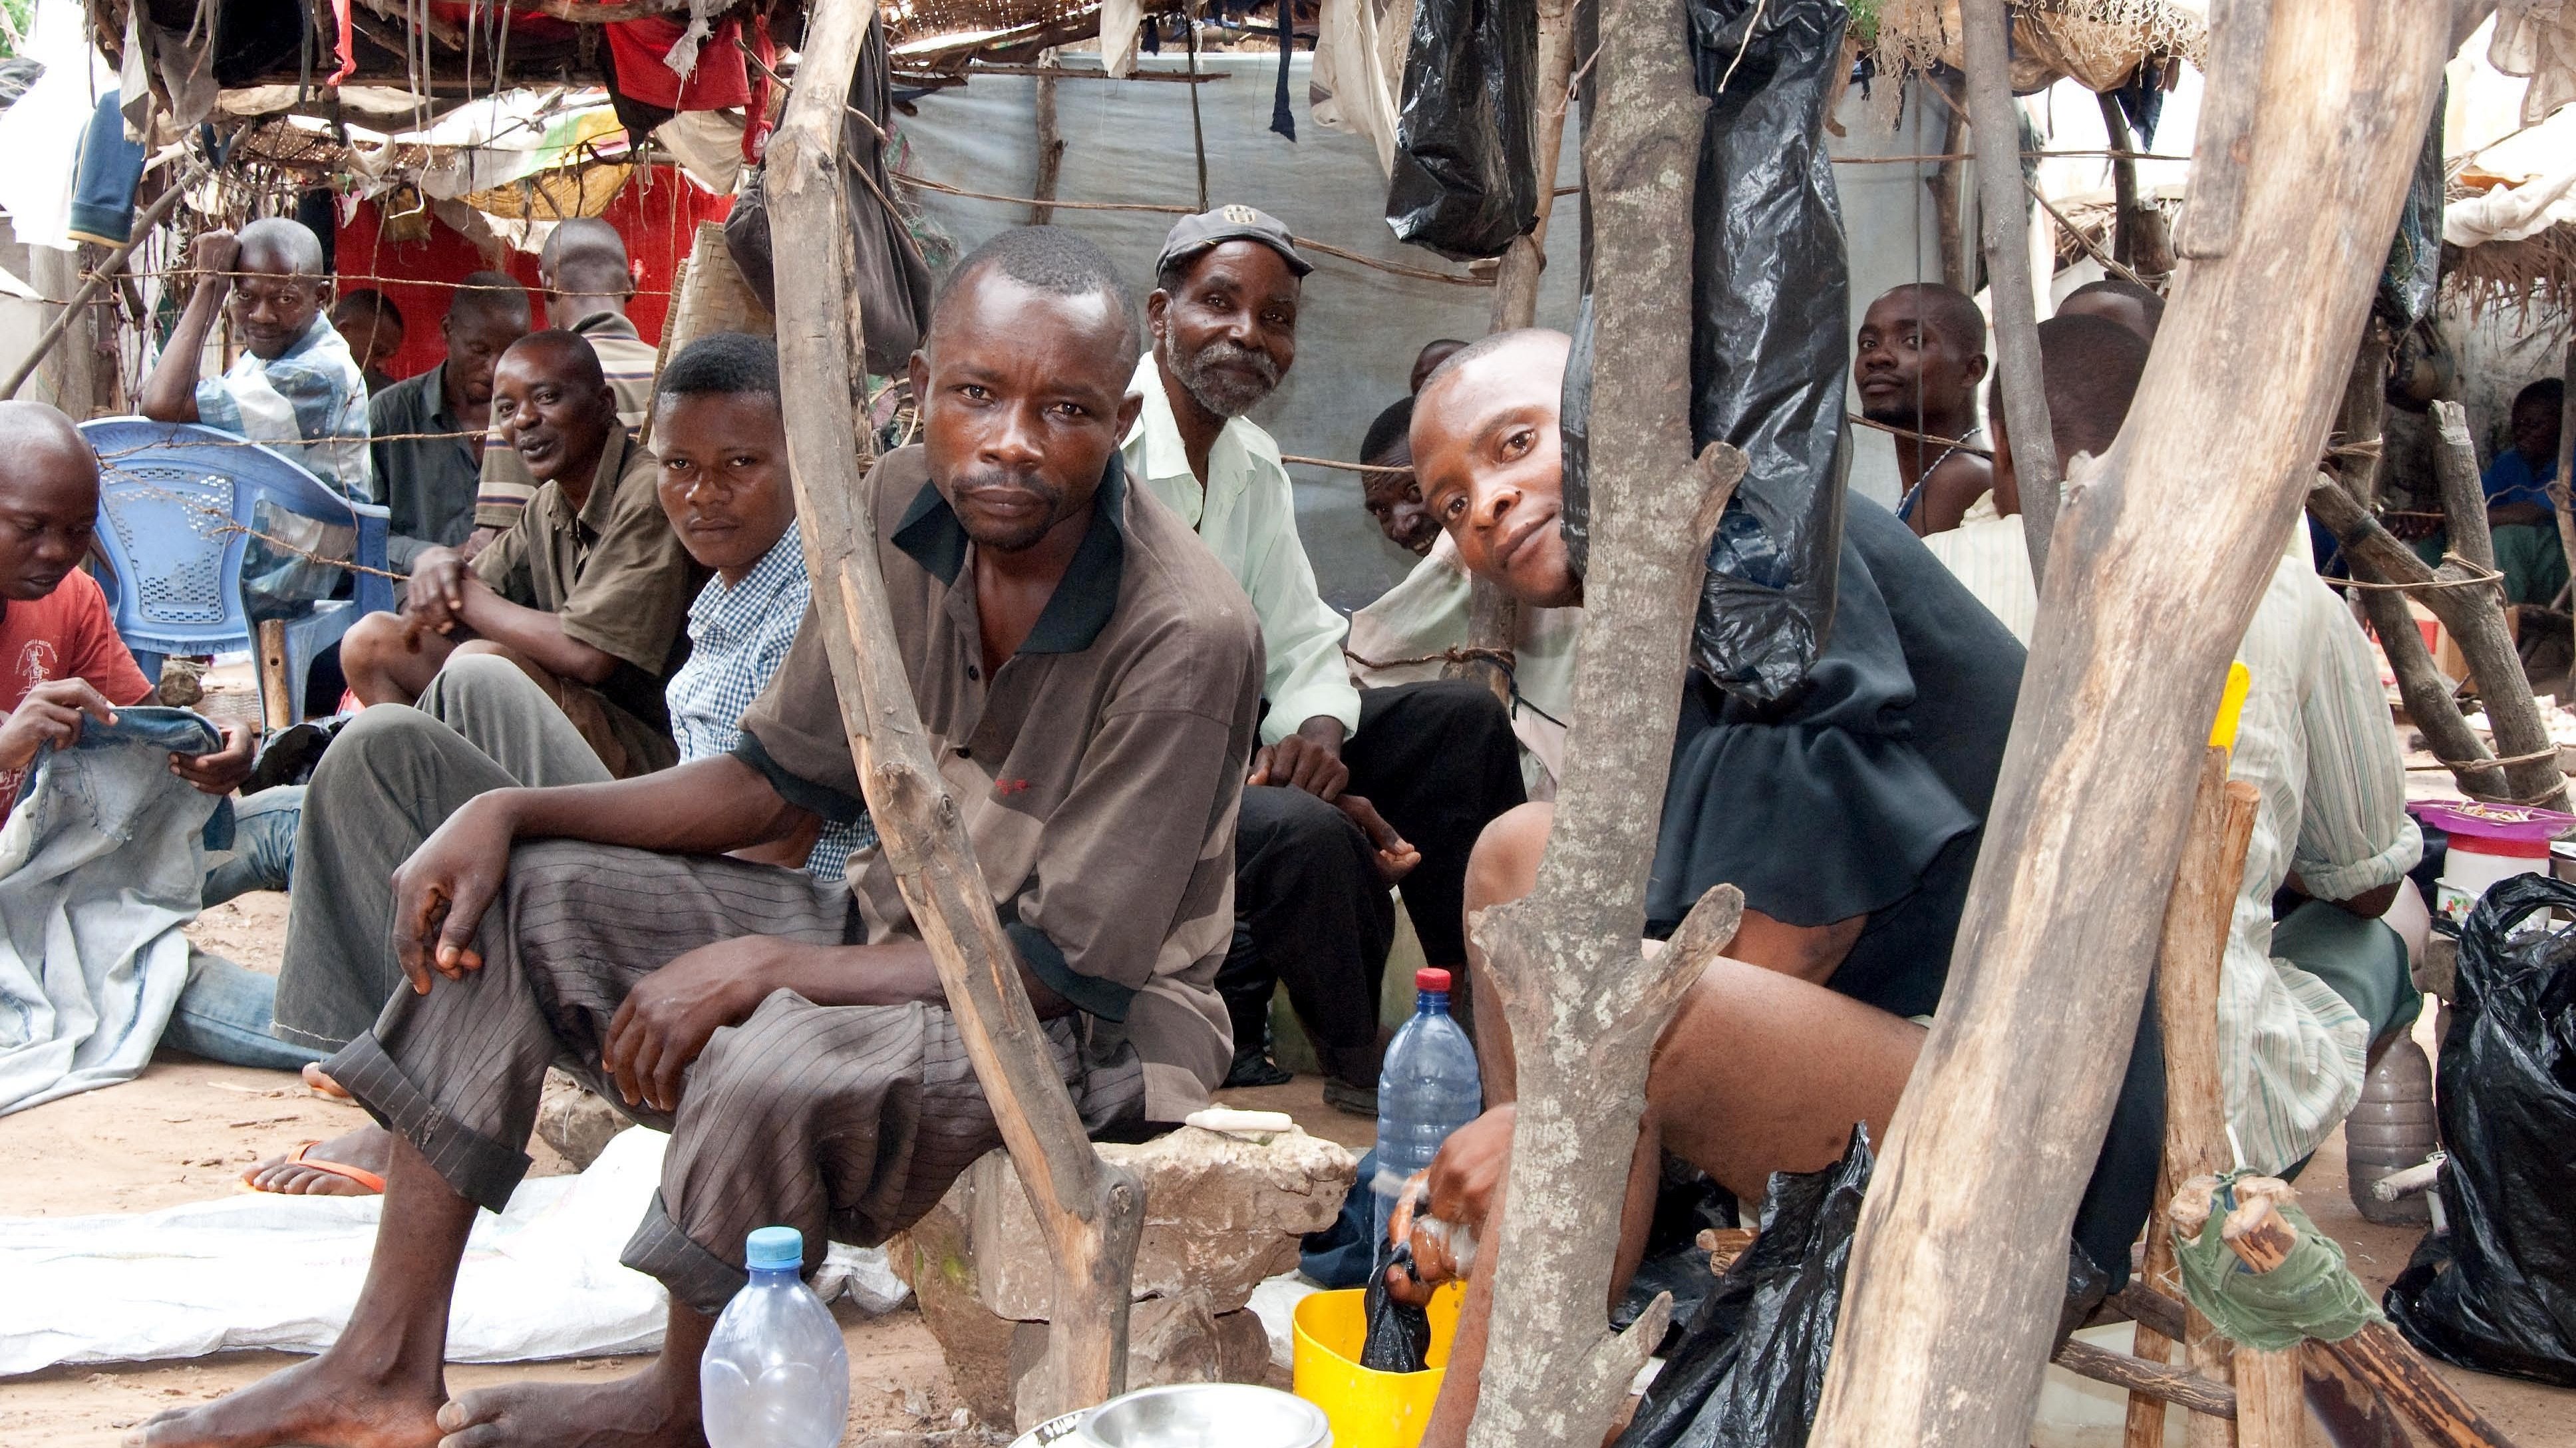 Why We Need Your Help to Provide Aid to Prisoners in the Congo